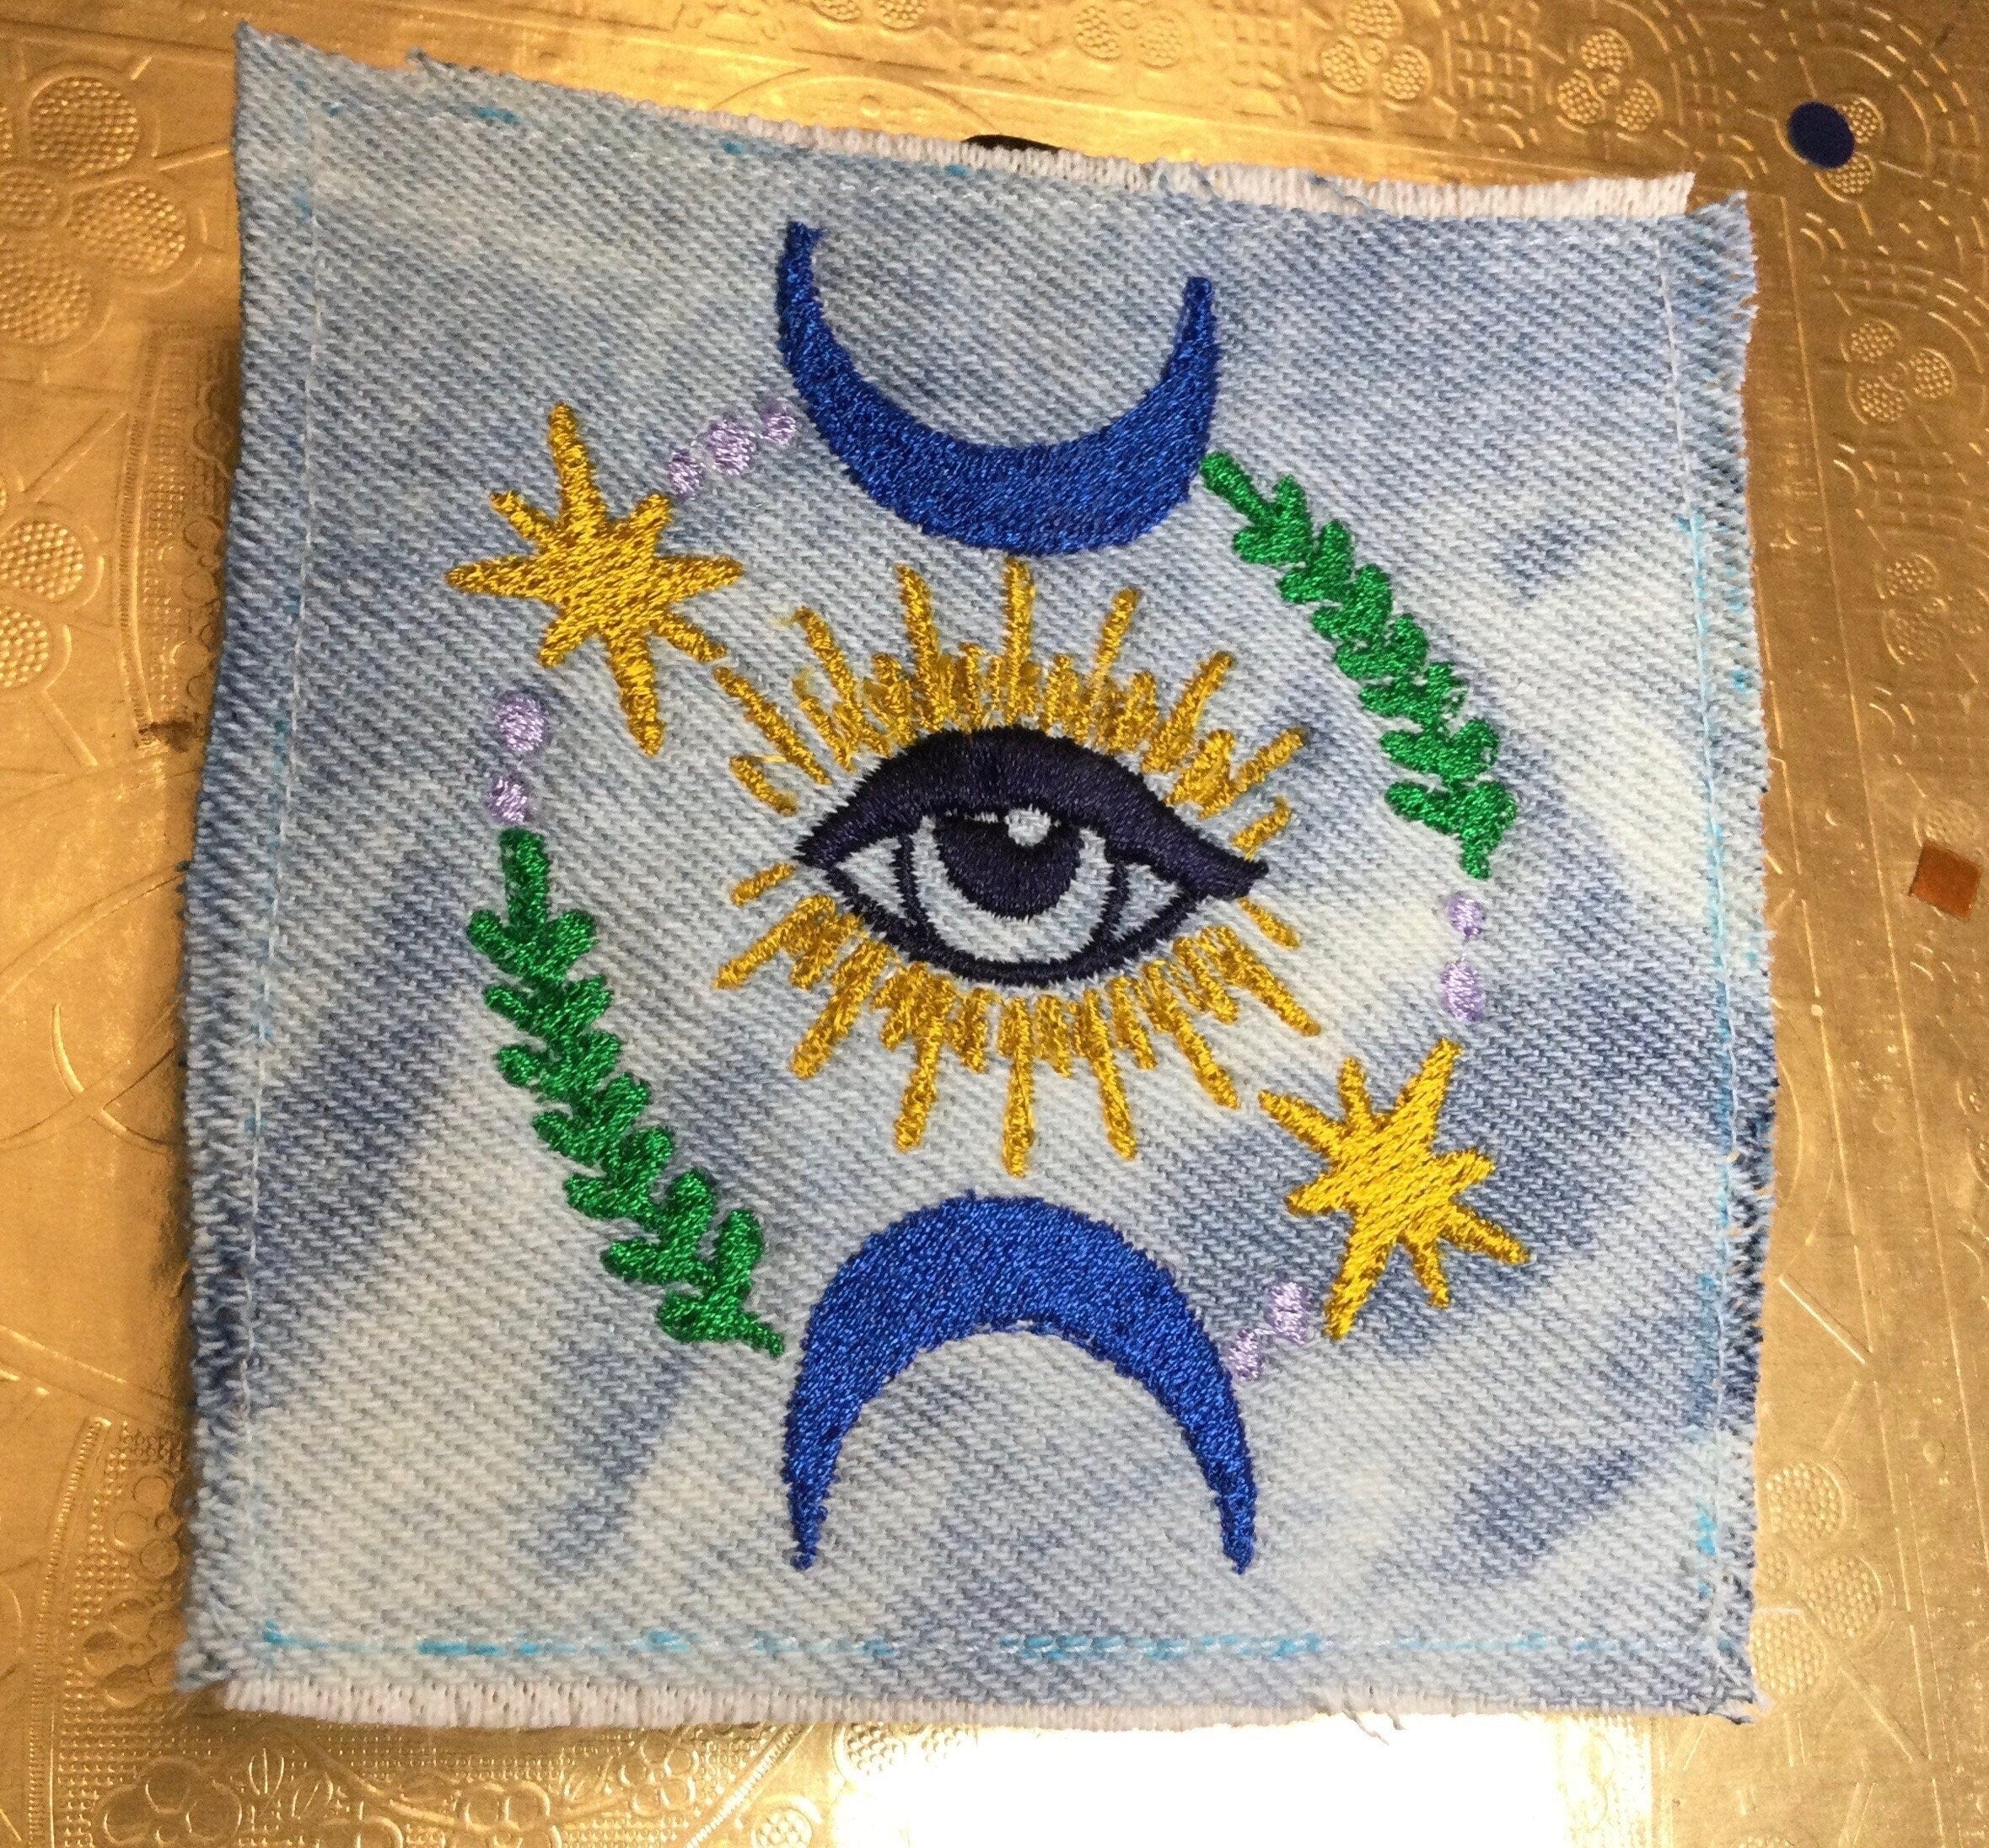 SOULE PATCH Protective Eye Indigo Bleached DENIM Handmade Patch Embroidered Colorful Appliques & Patches